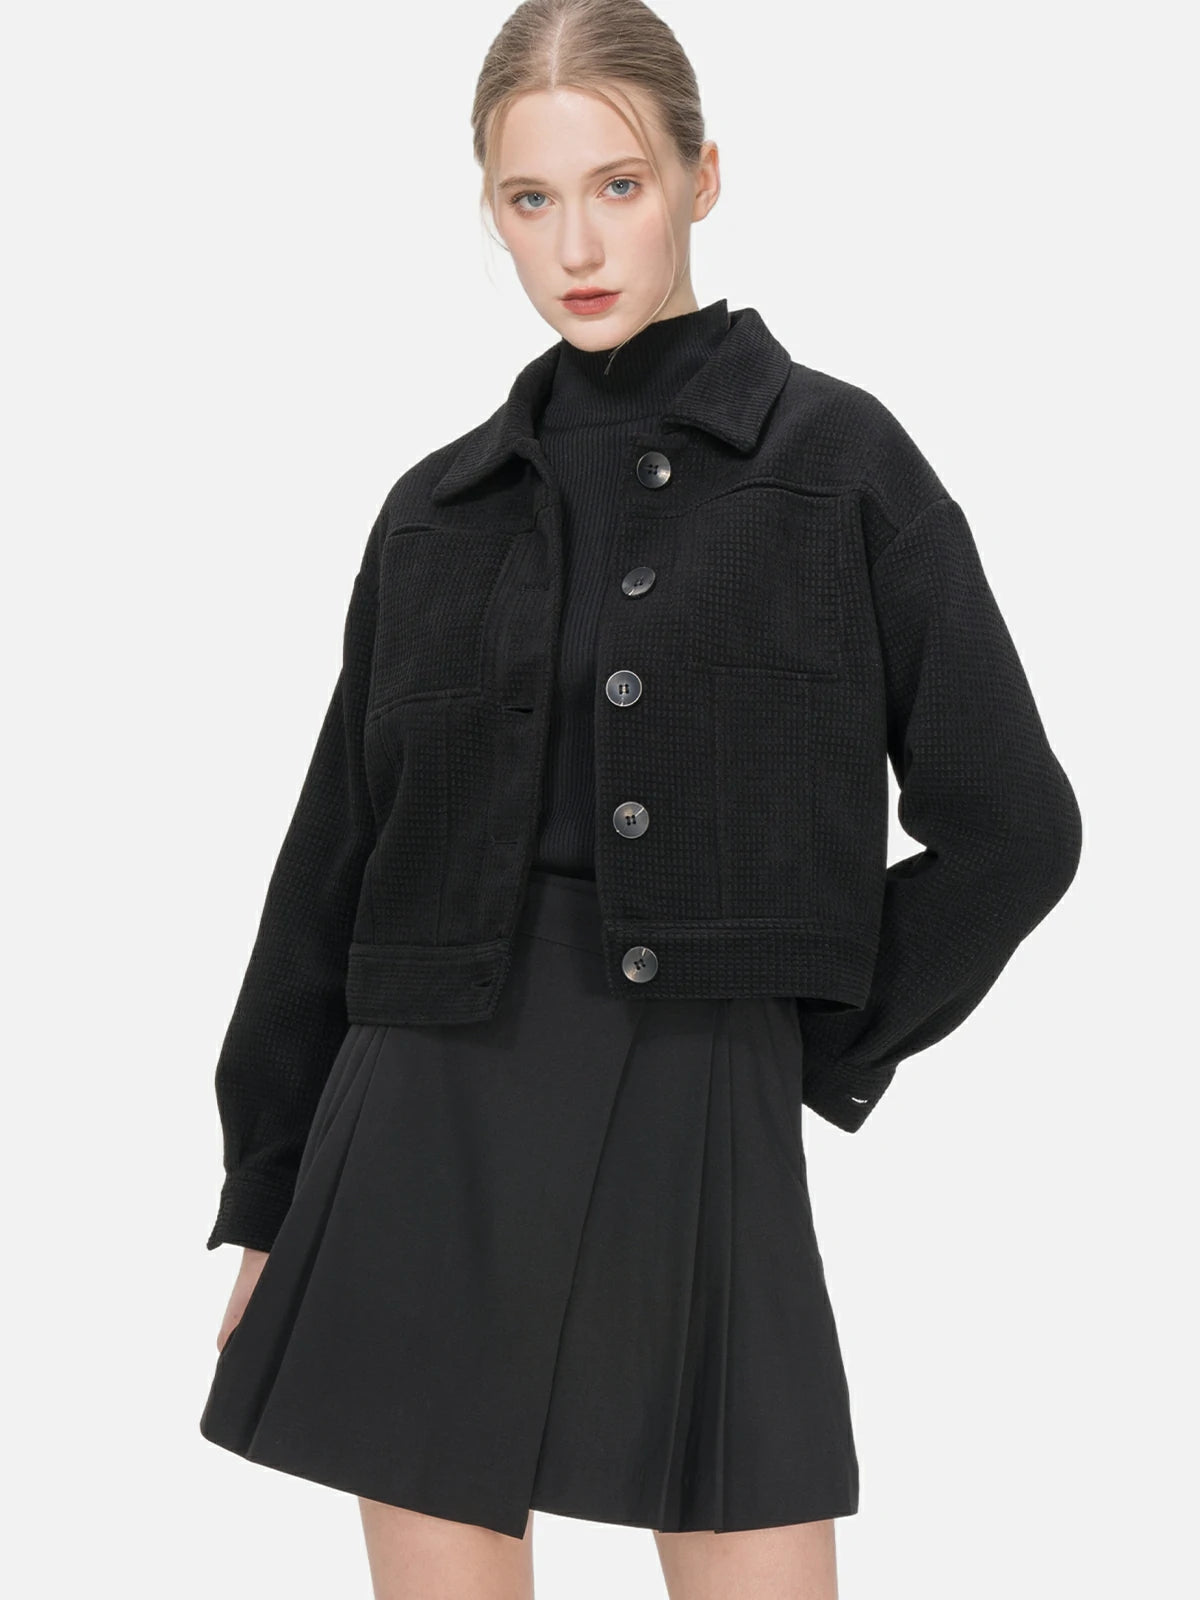 Elevate your wardrobe with this black short jacket, featuring a collared design and an exquisite waffle-grid pattern.